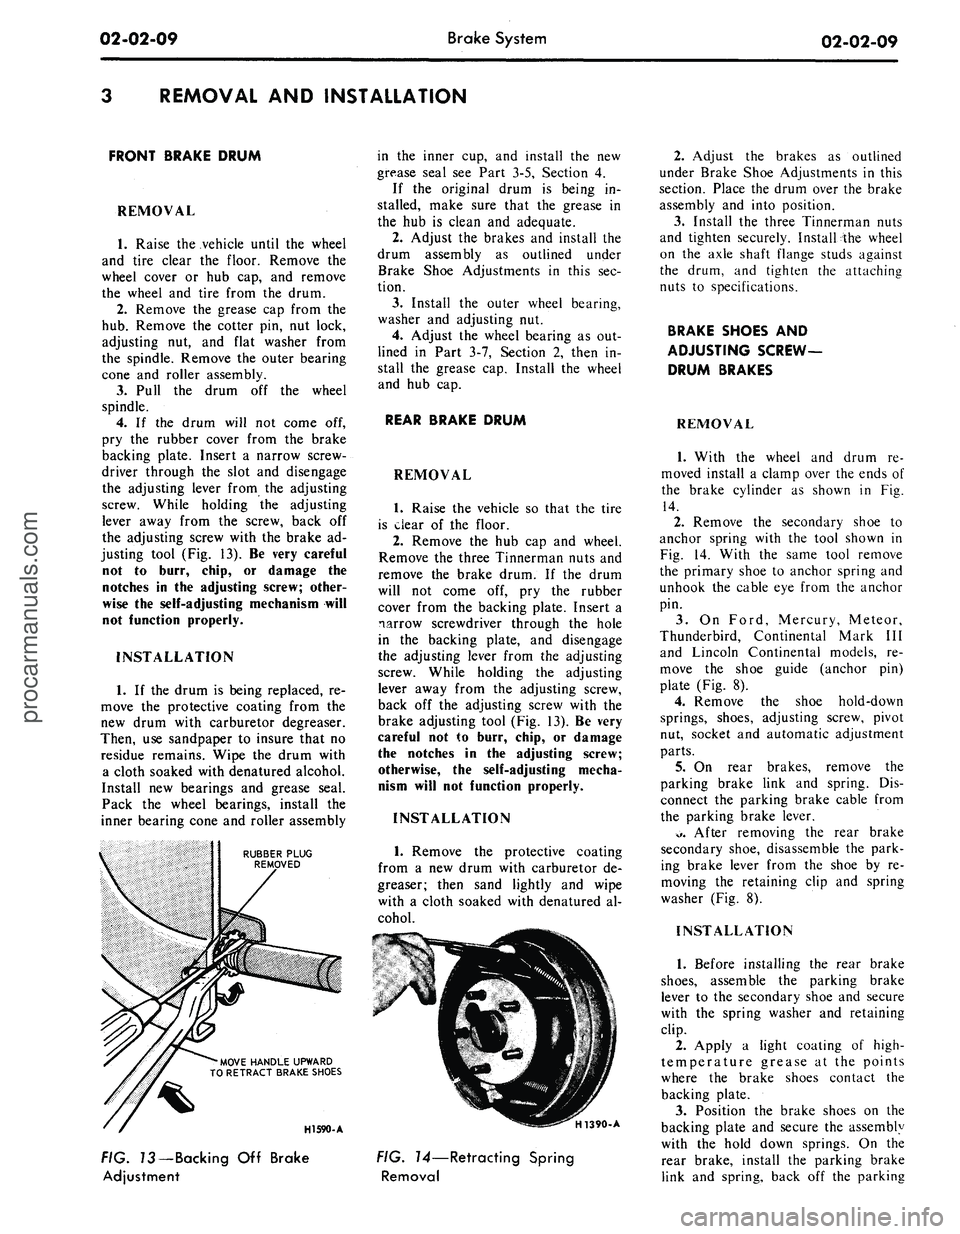 FORD MUSTANG 1969  Volume One Chassis 
02-02-09 
Brake System

02-02-09

REMOVAL AND INSTALLATION

FRONT BRAKE DRUM

REMOVAL

1.
 Raise the vehicle until the wheel

and tire clear the floor. Remove the

wheel cover or hub cap, and remove
